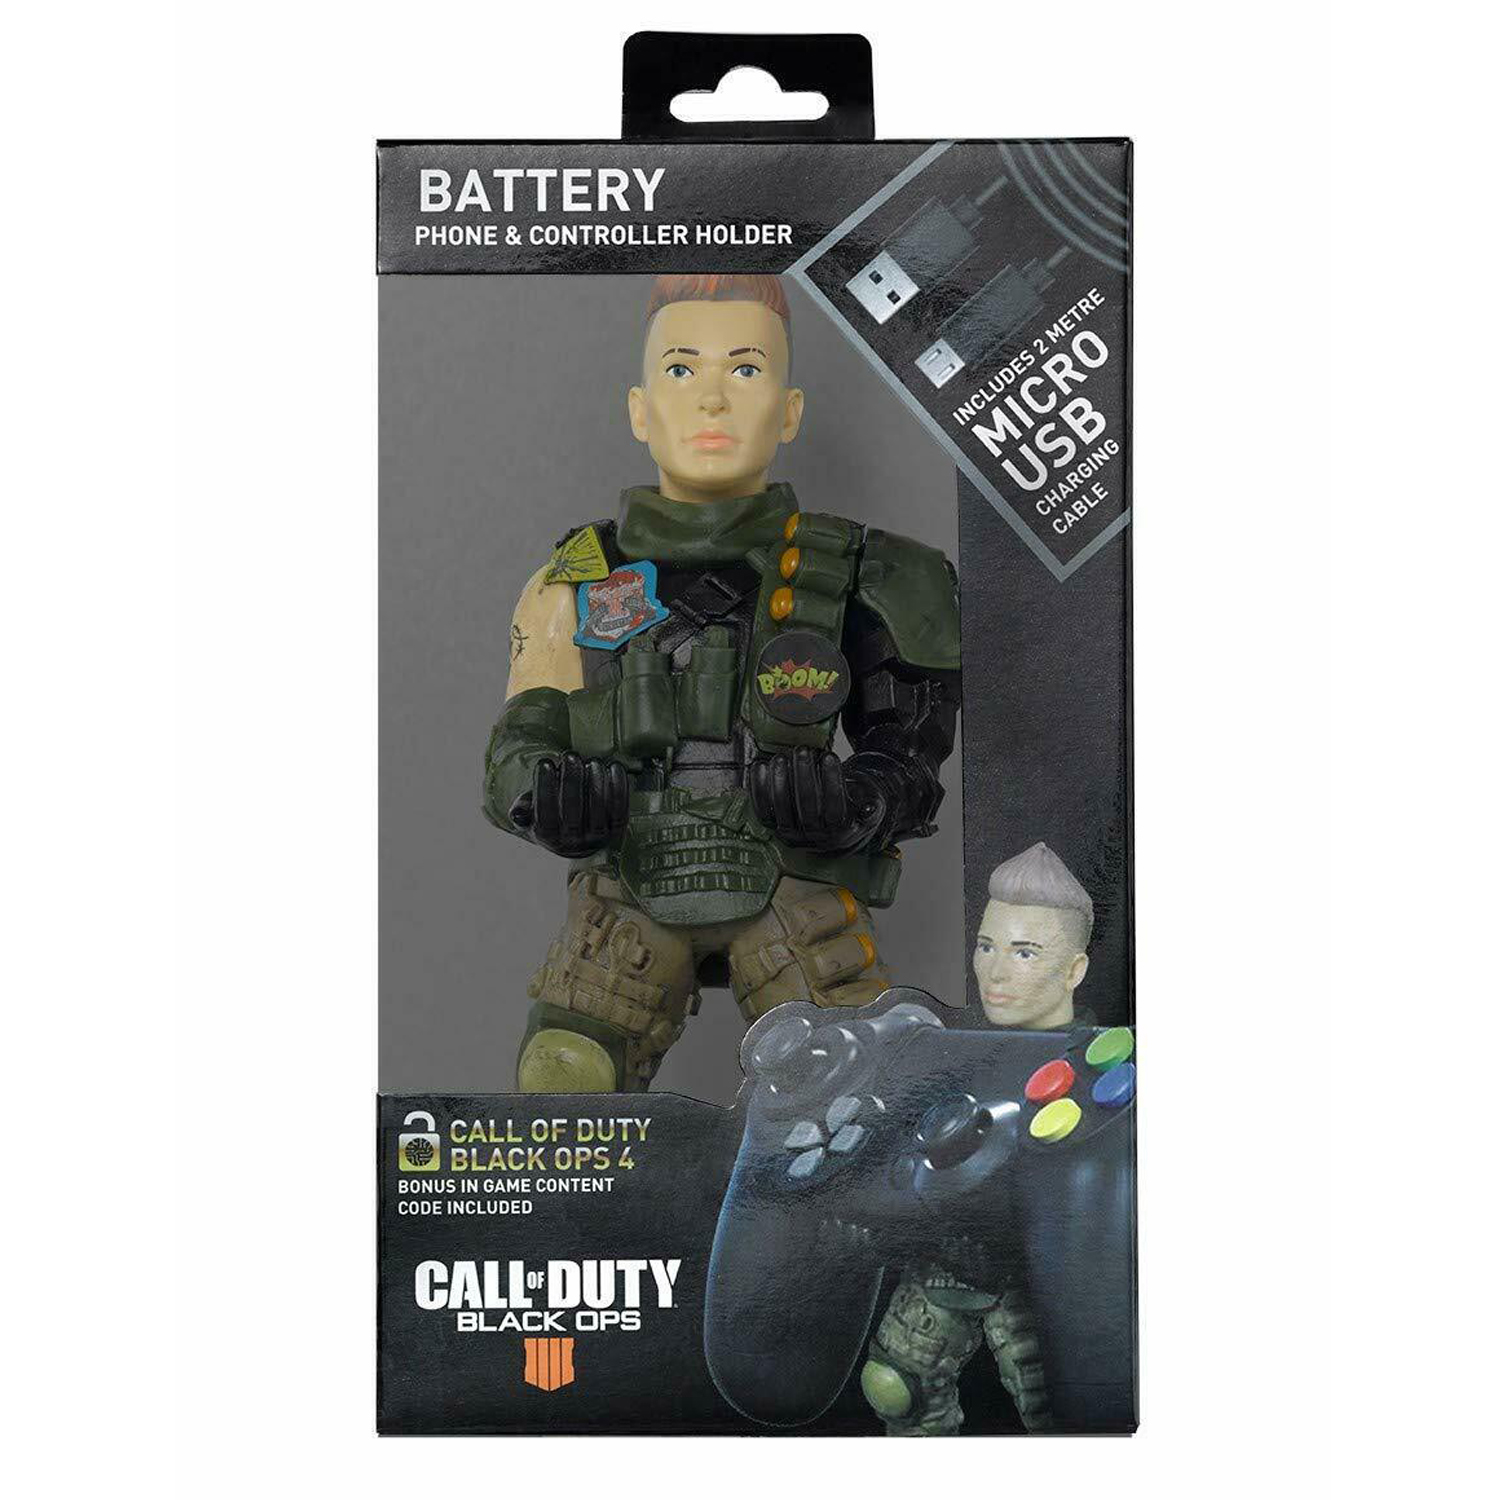 KOCH MEDIA GMBH Cable - Specialist Call Duty Battery Guy of